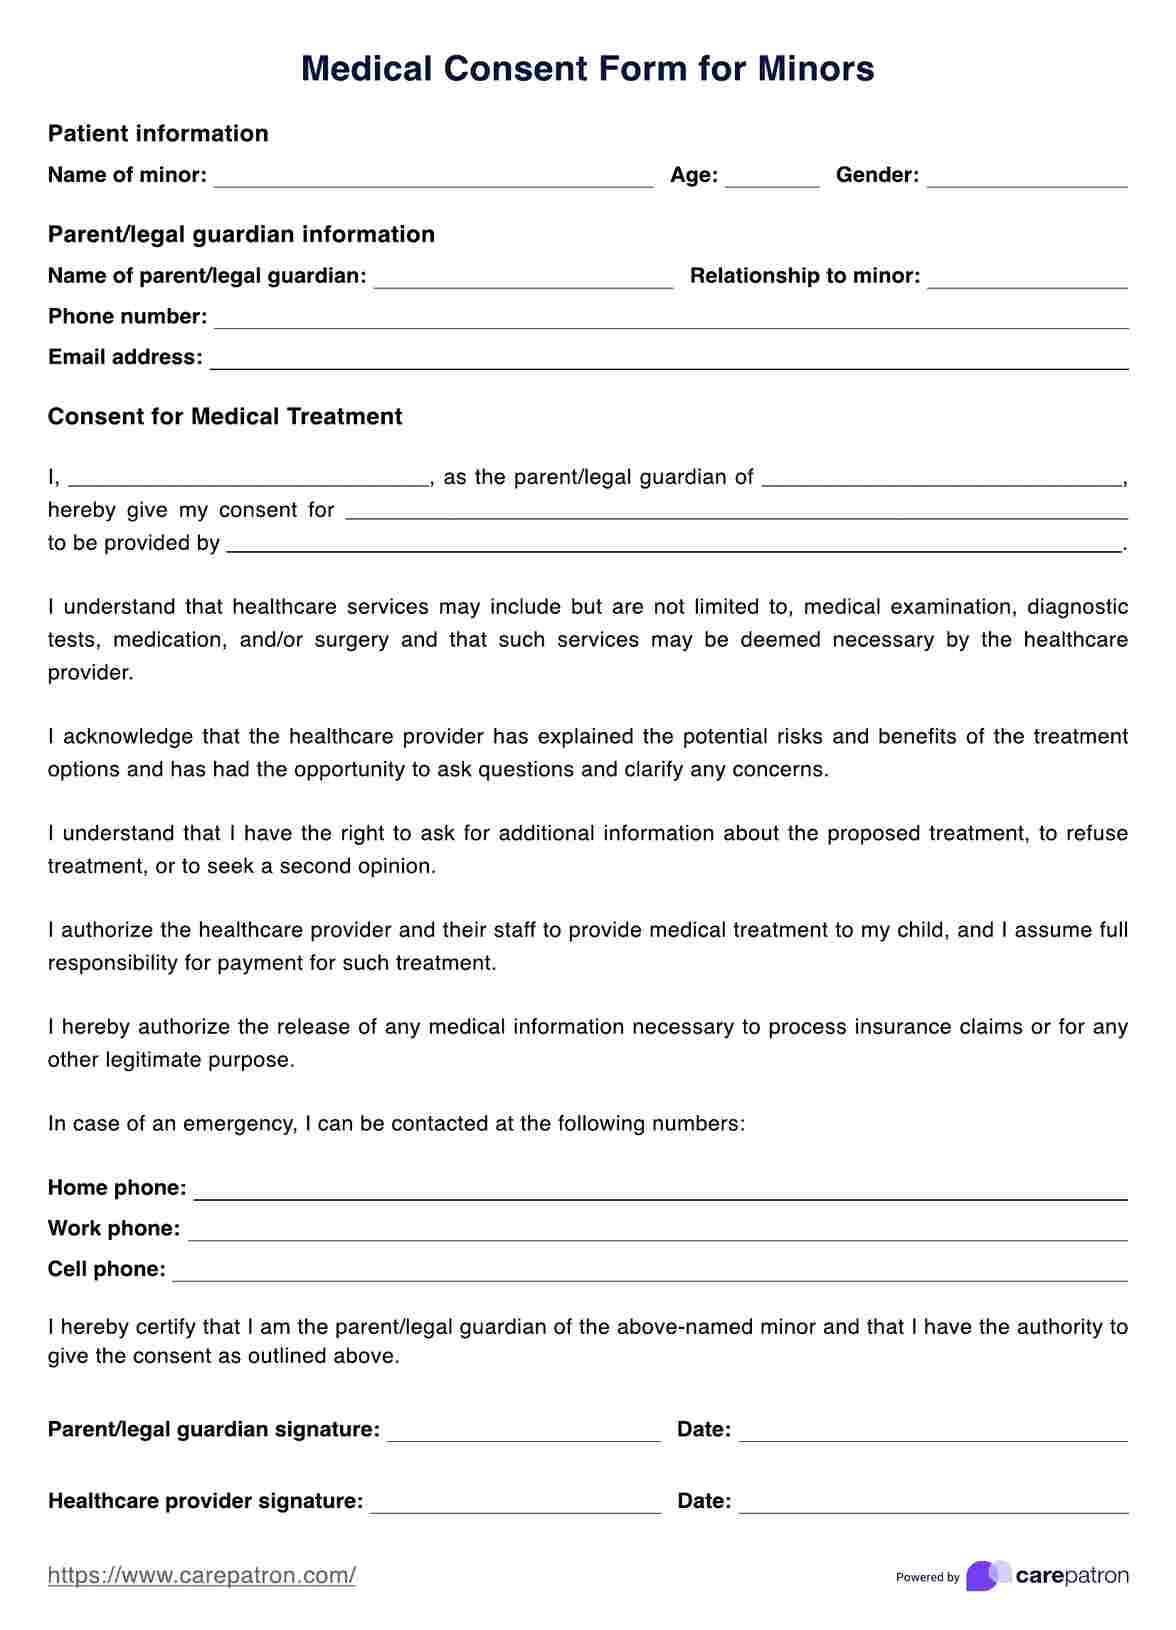 Medical Consent Form For Minor PDF Example